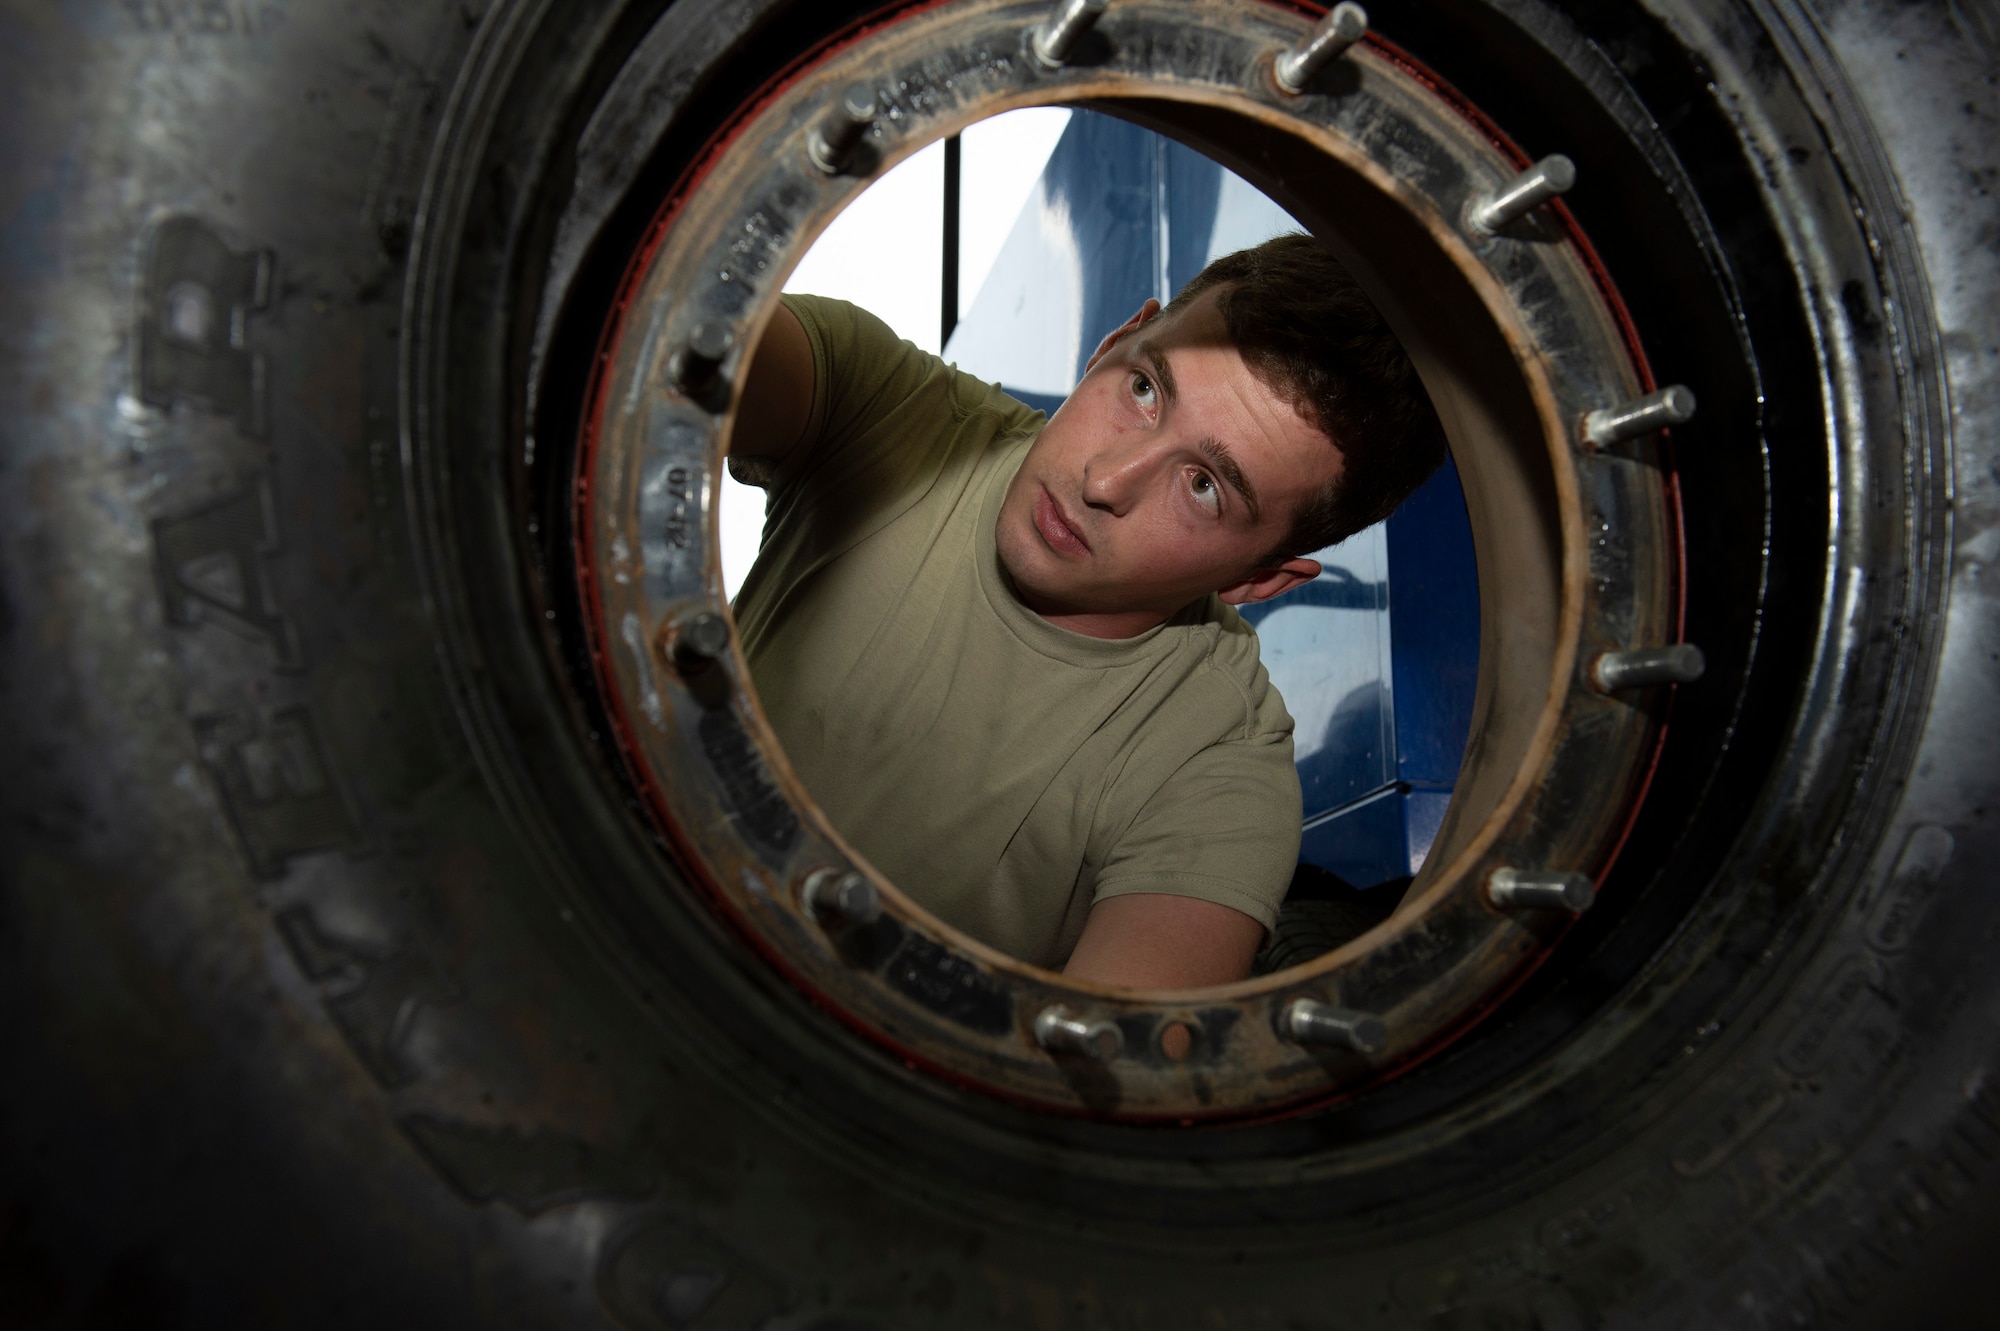 U.S. Air Force Airman 1st Class Colin Coogan, 52nd Logistics Readiness Squadron vehicle maintenance journeyman, performs, an inspection on a tire at Spangdadhlem Air Base, Germany, Aug. 7, 2019.